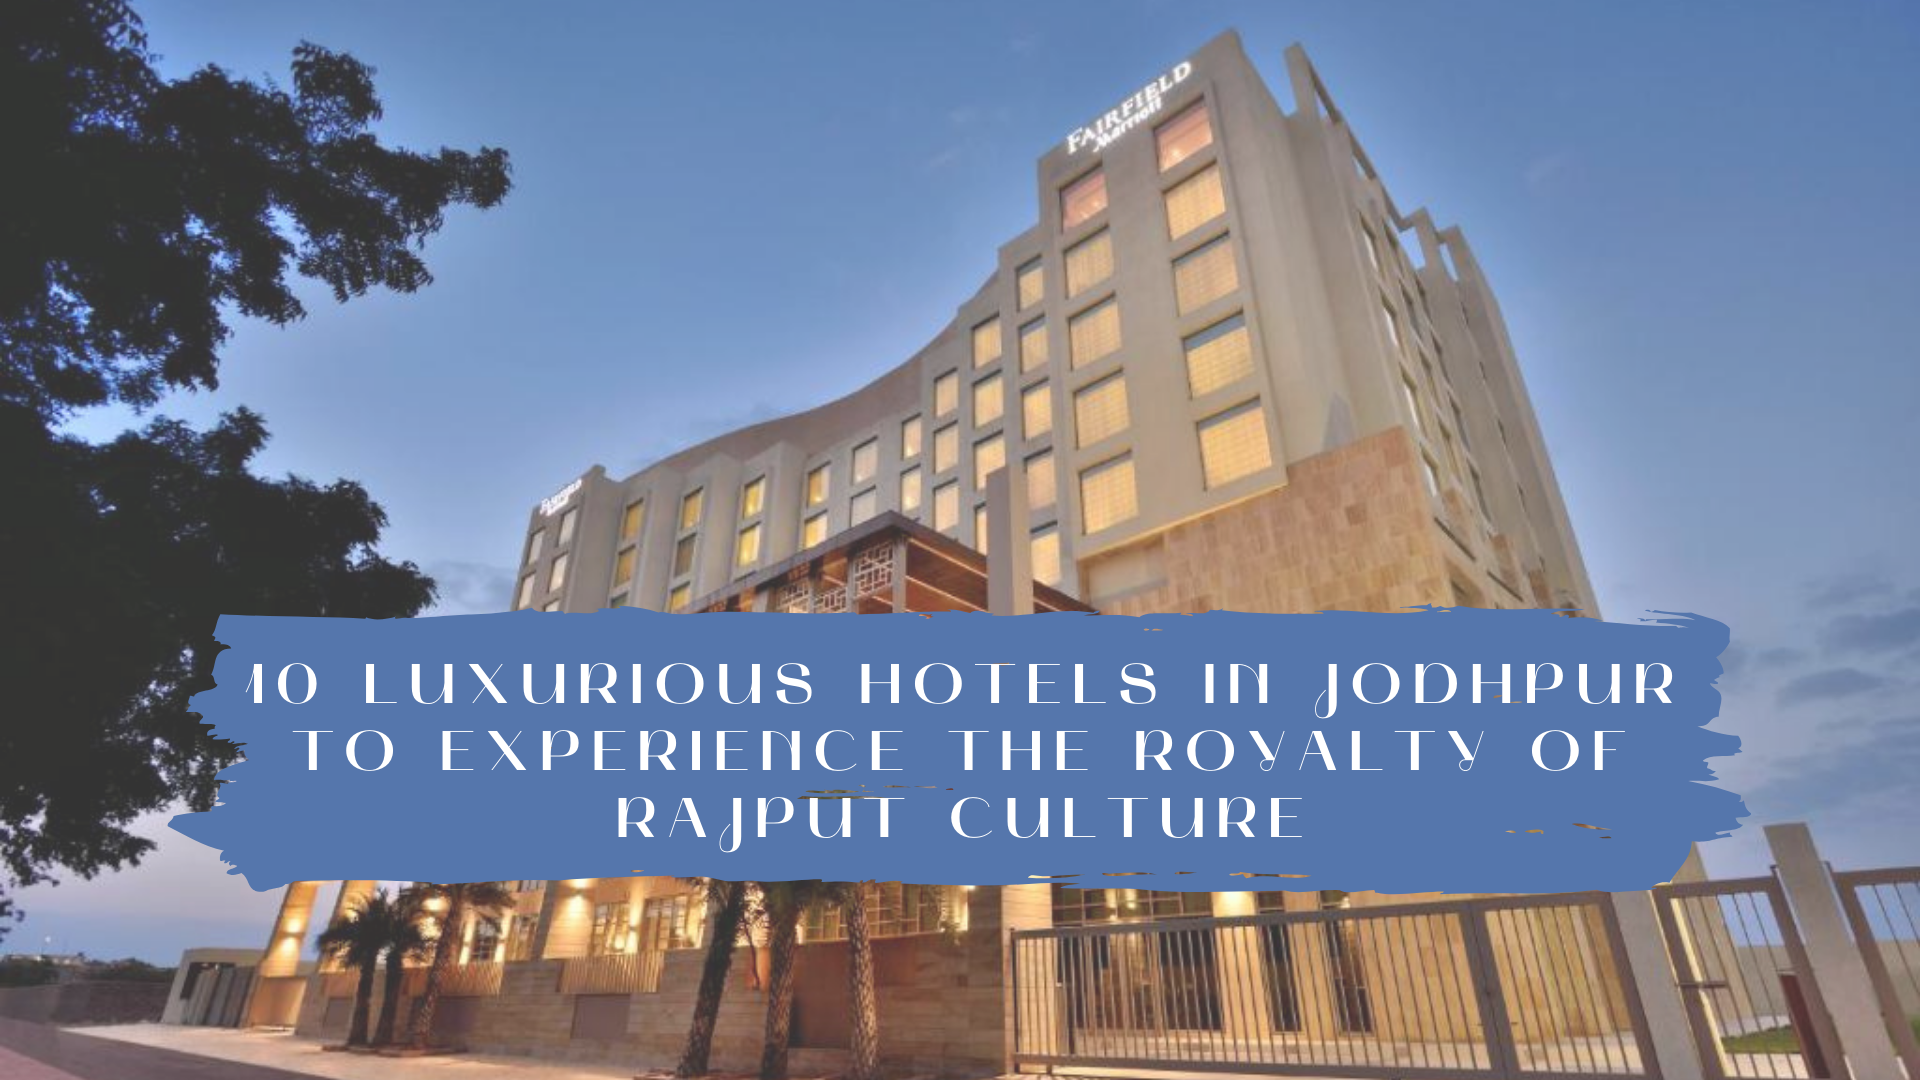 10 Luxurious Hotels In Jodhpur To Experience The Royalty Of Rajput Culture